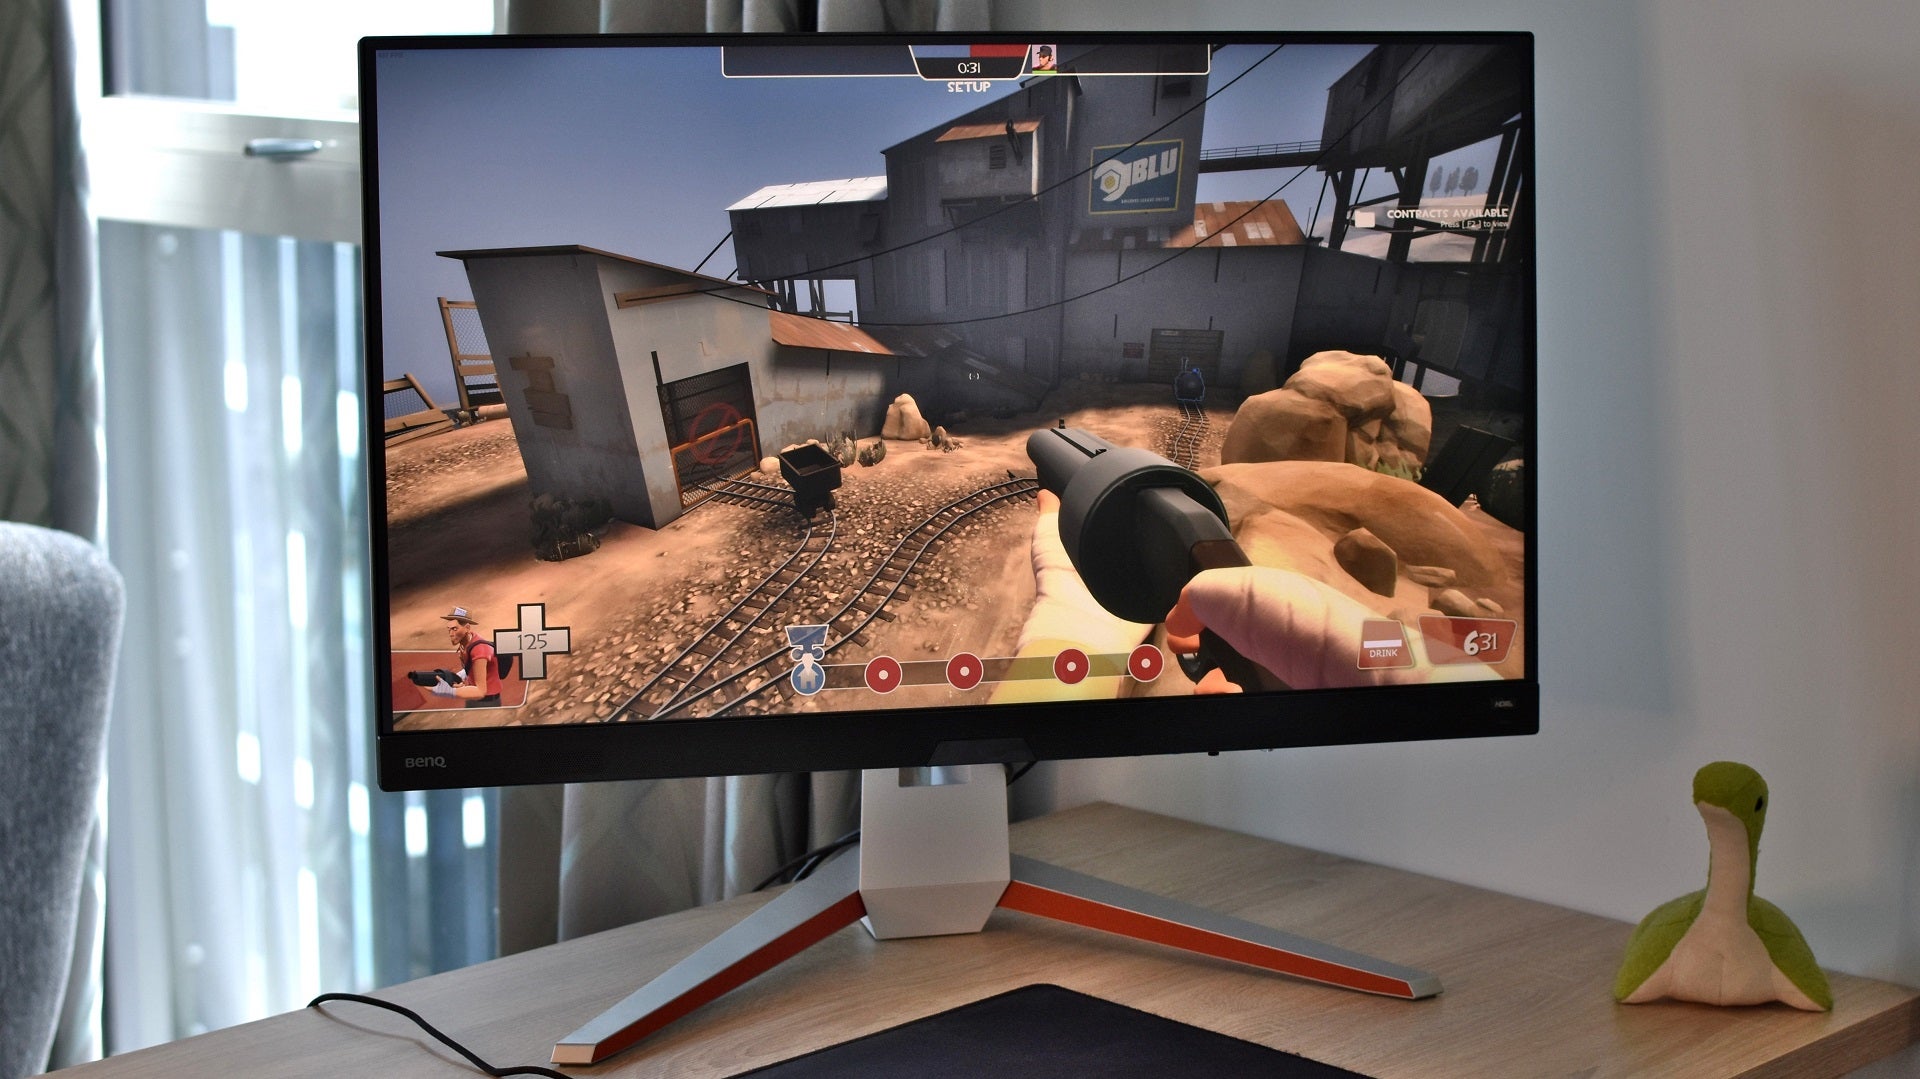 The BenQ Mobiuz EX3210U 4K gaming monitor, showing a scene from Team Fortress 2.